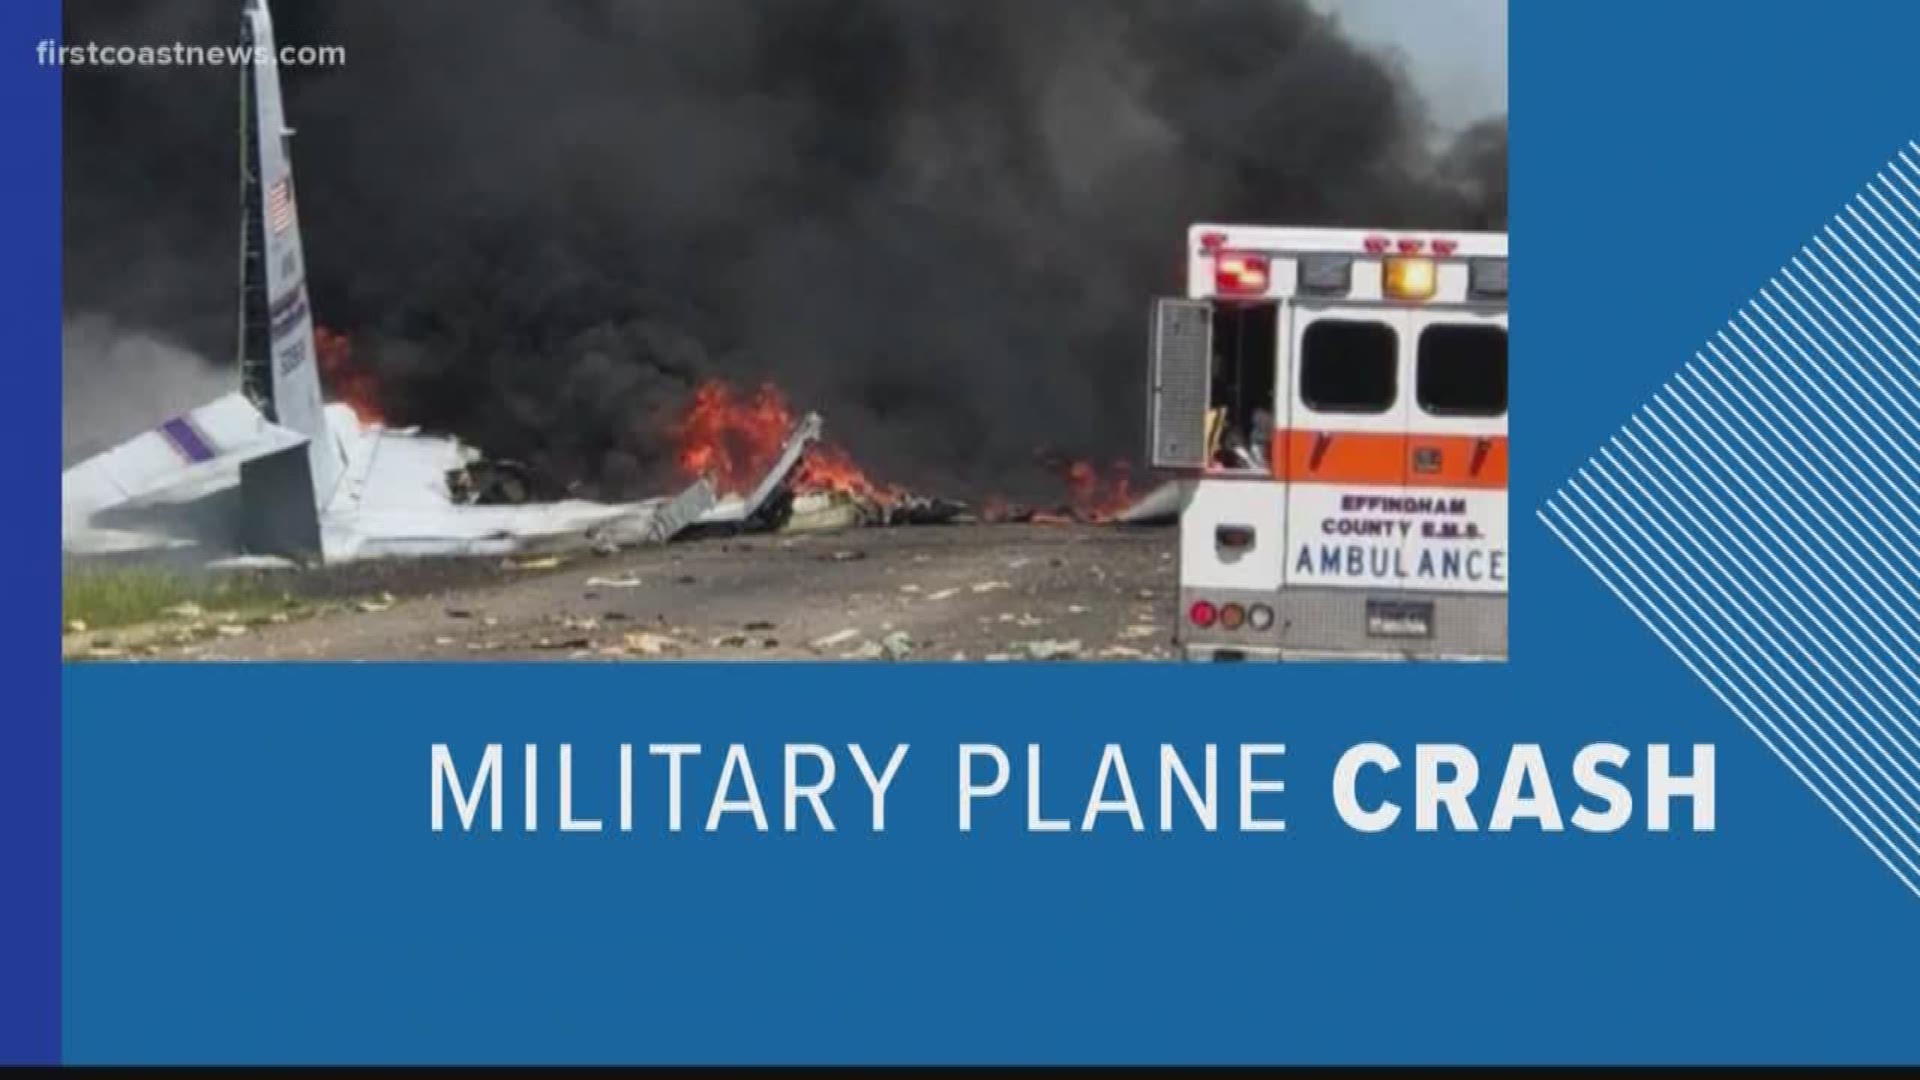 Emergency personnel in Savannah, Georgia are responding to a military plane crash Wednesday near the airport.